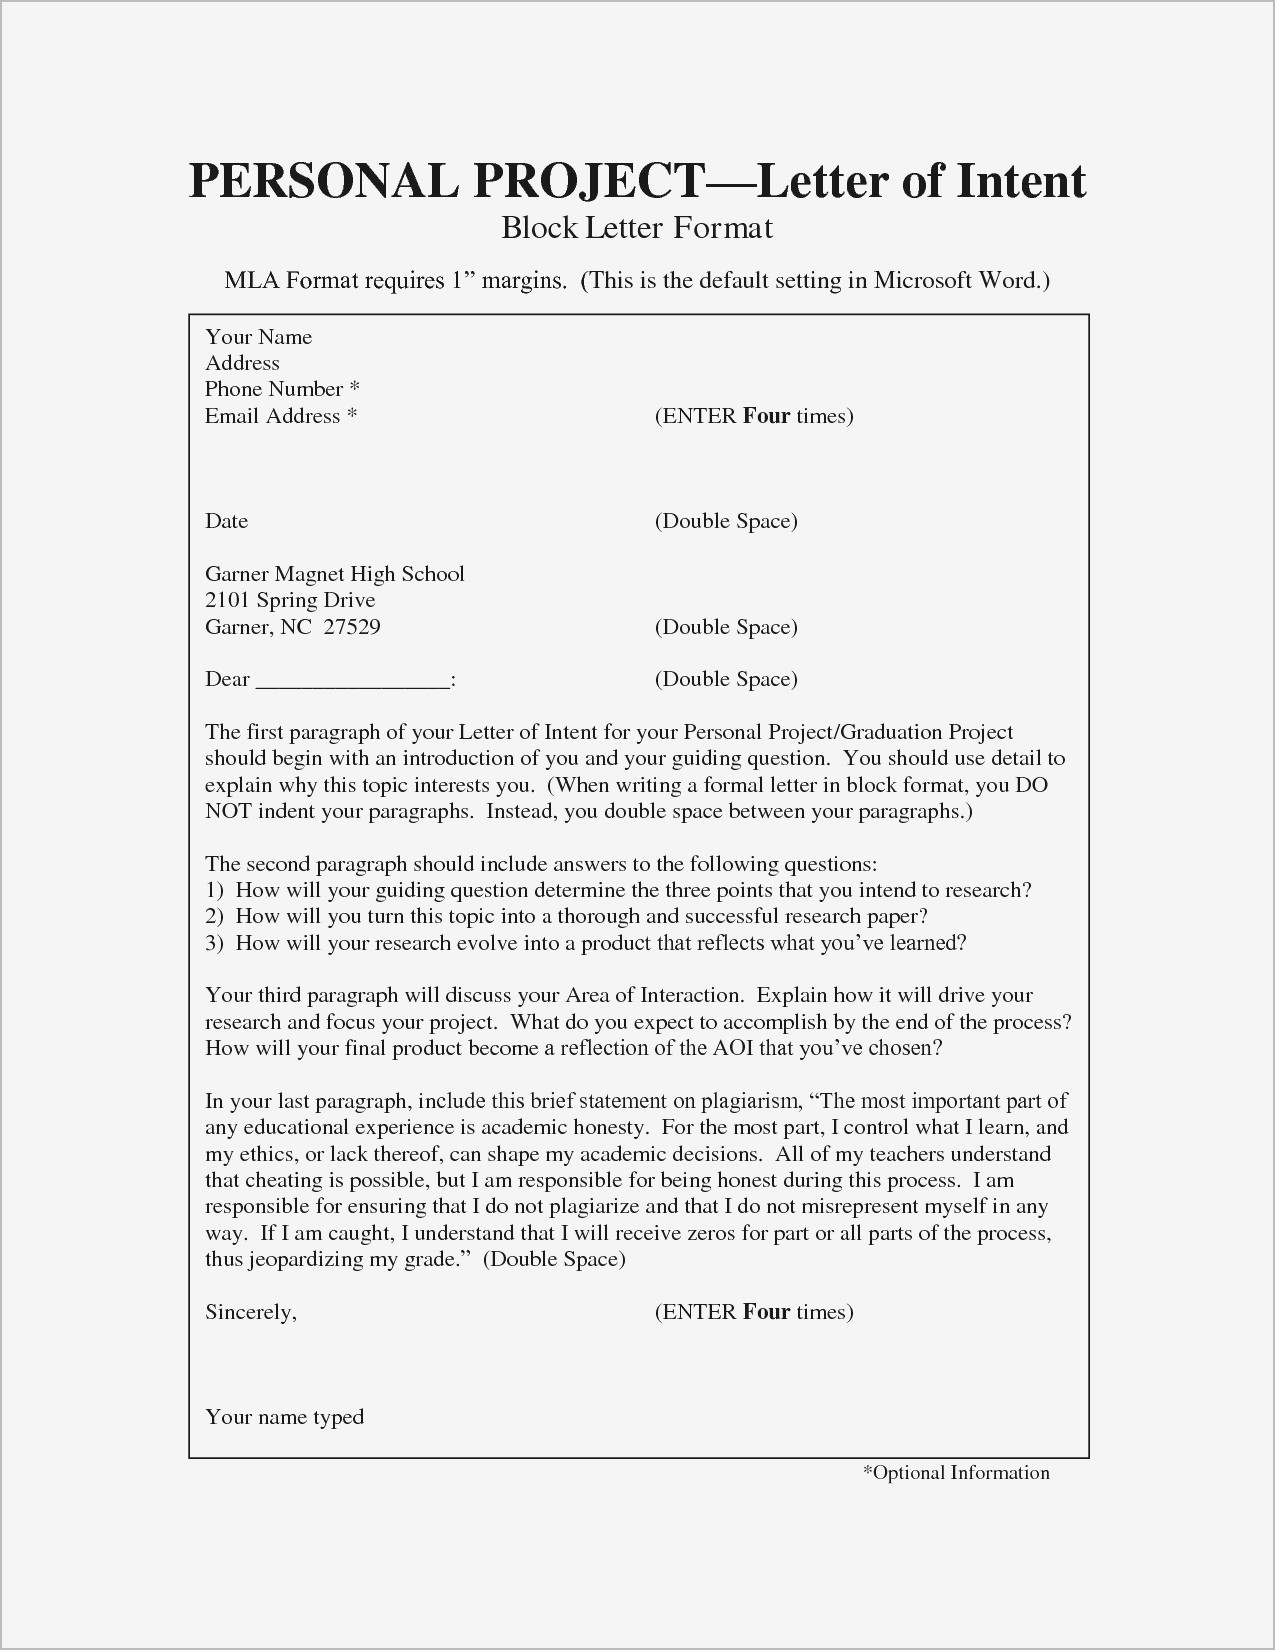 Letter Of Intent Template - Inspirational Letter Templates